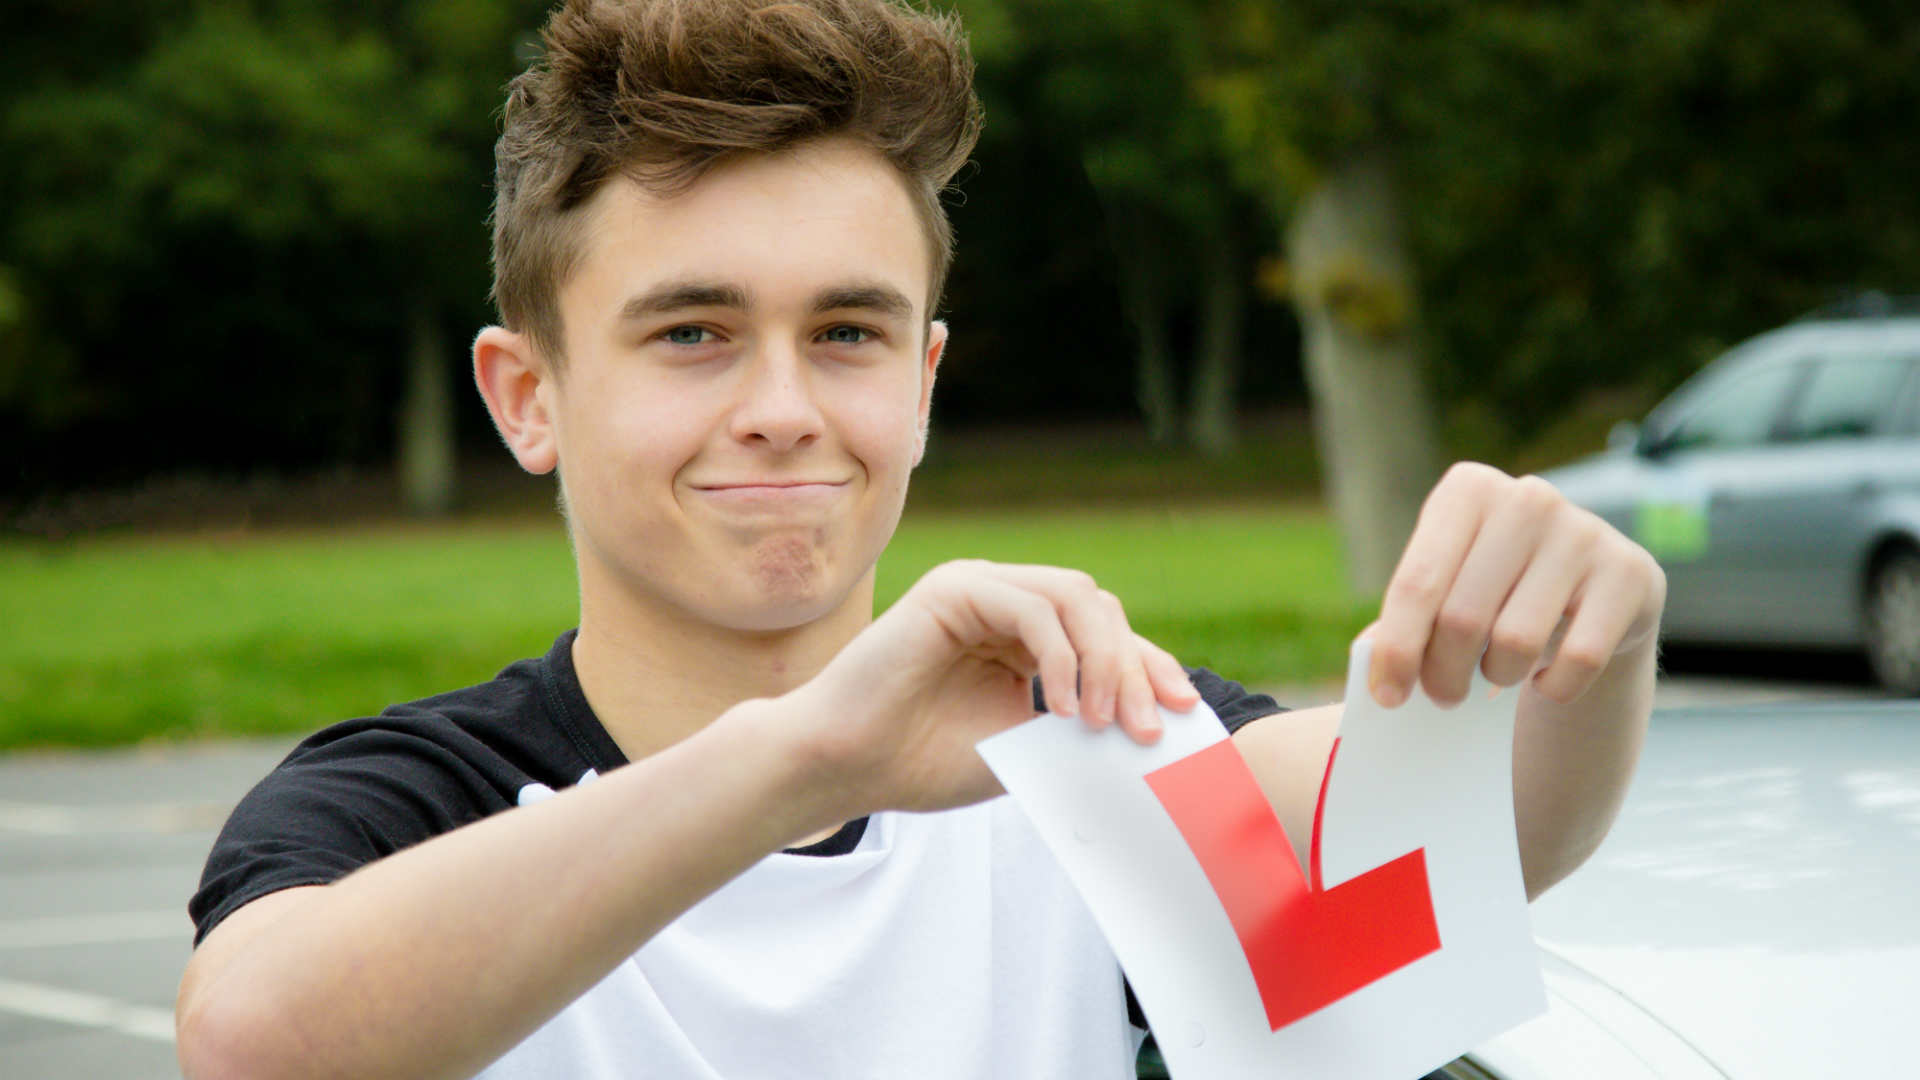 Passed driving test